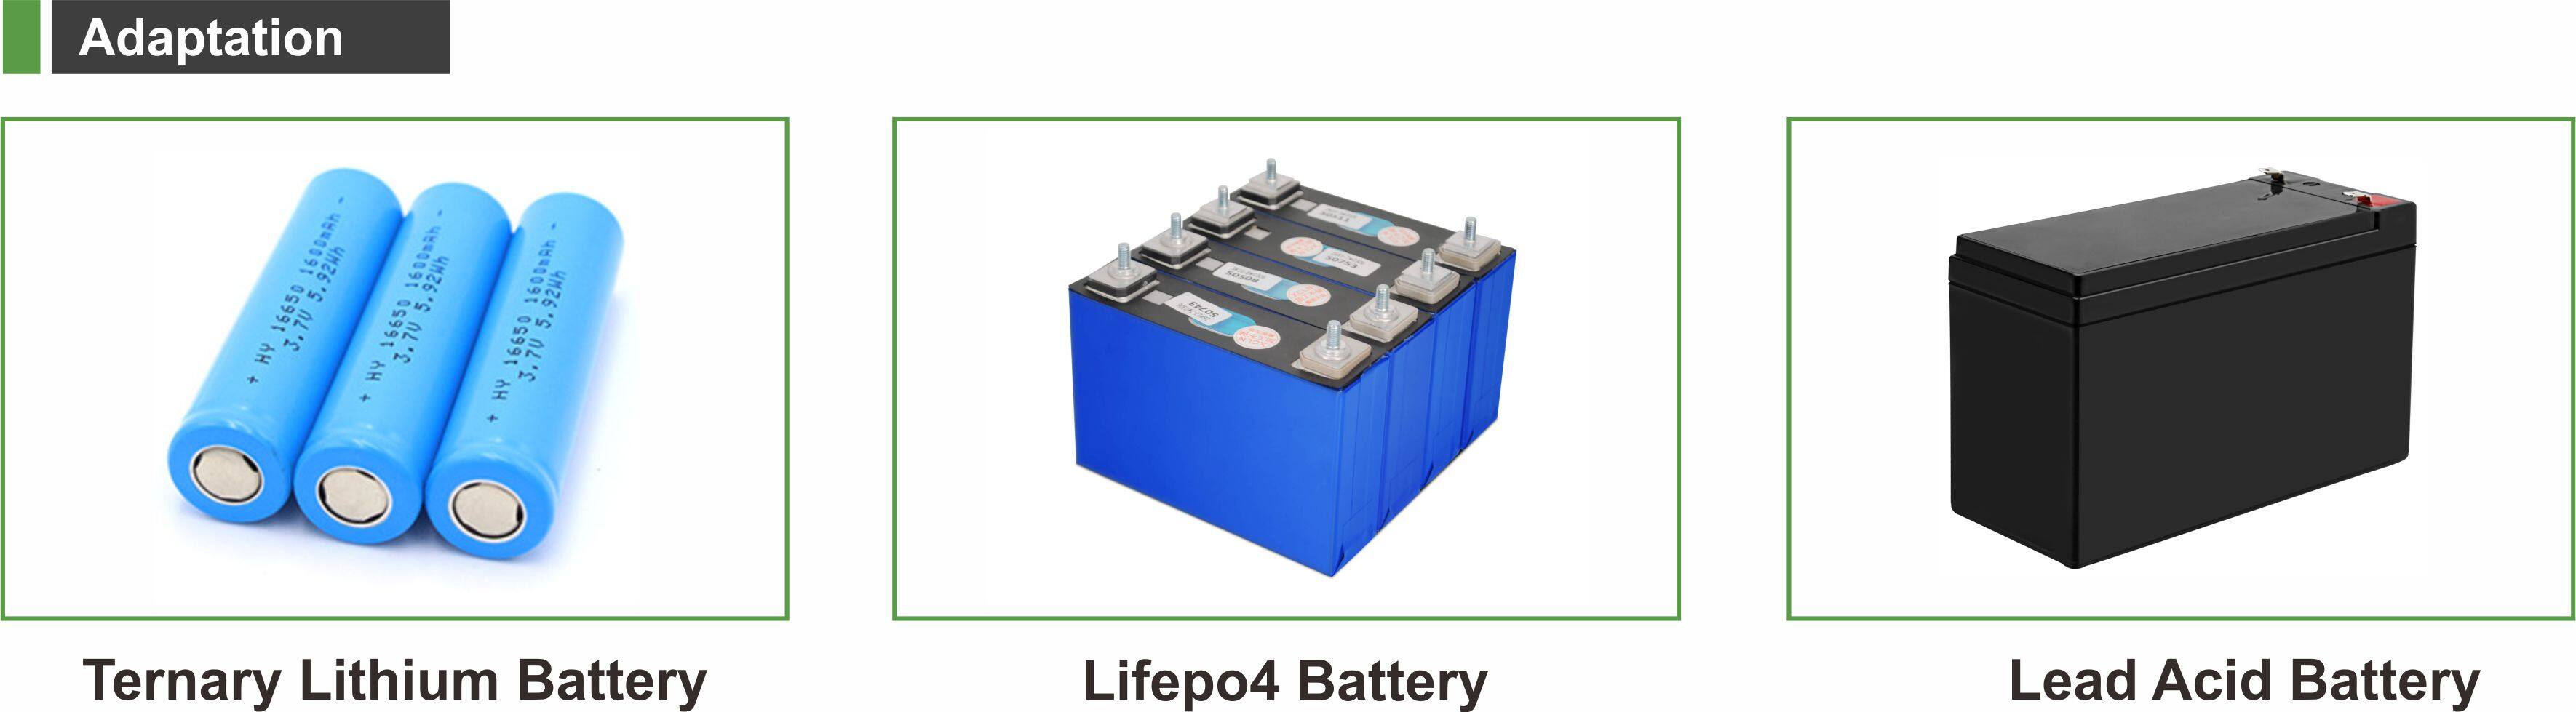 charging lithium ion battery overnight